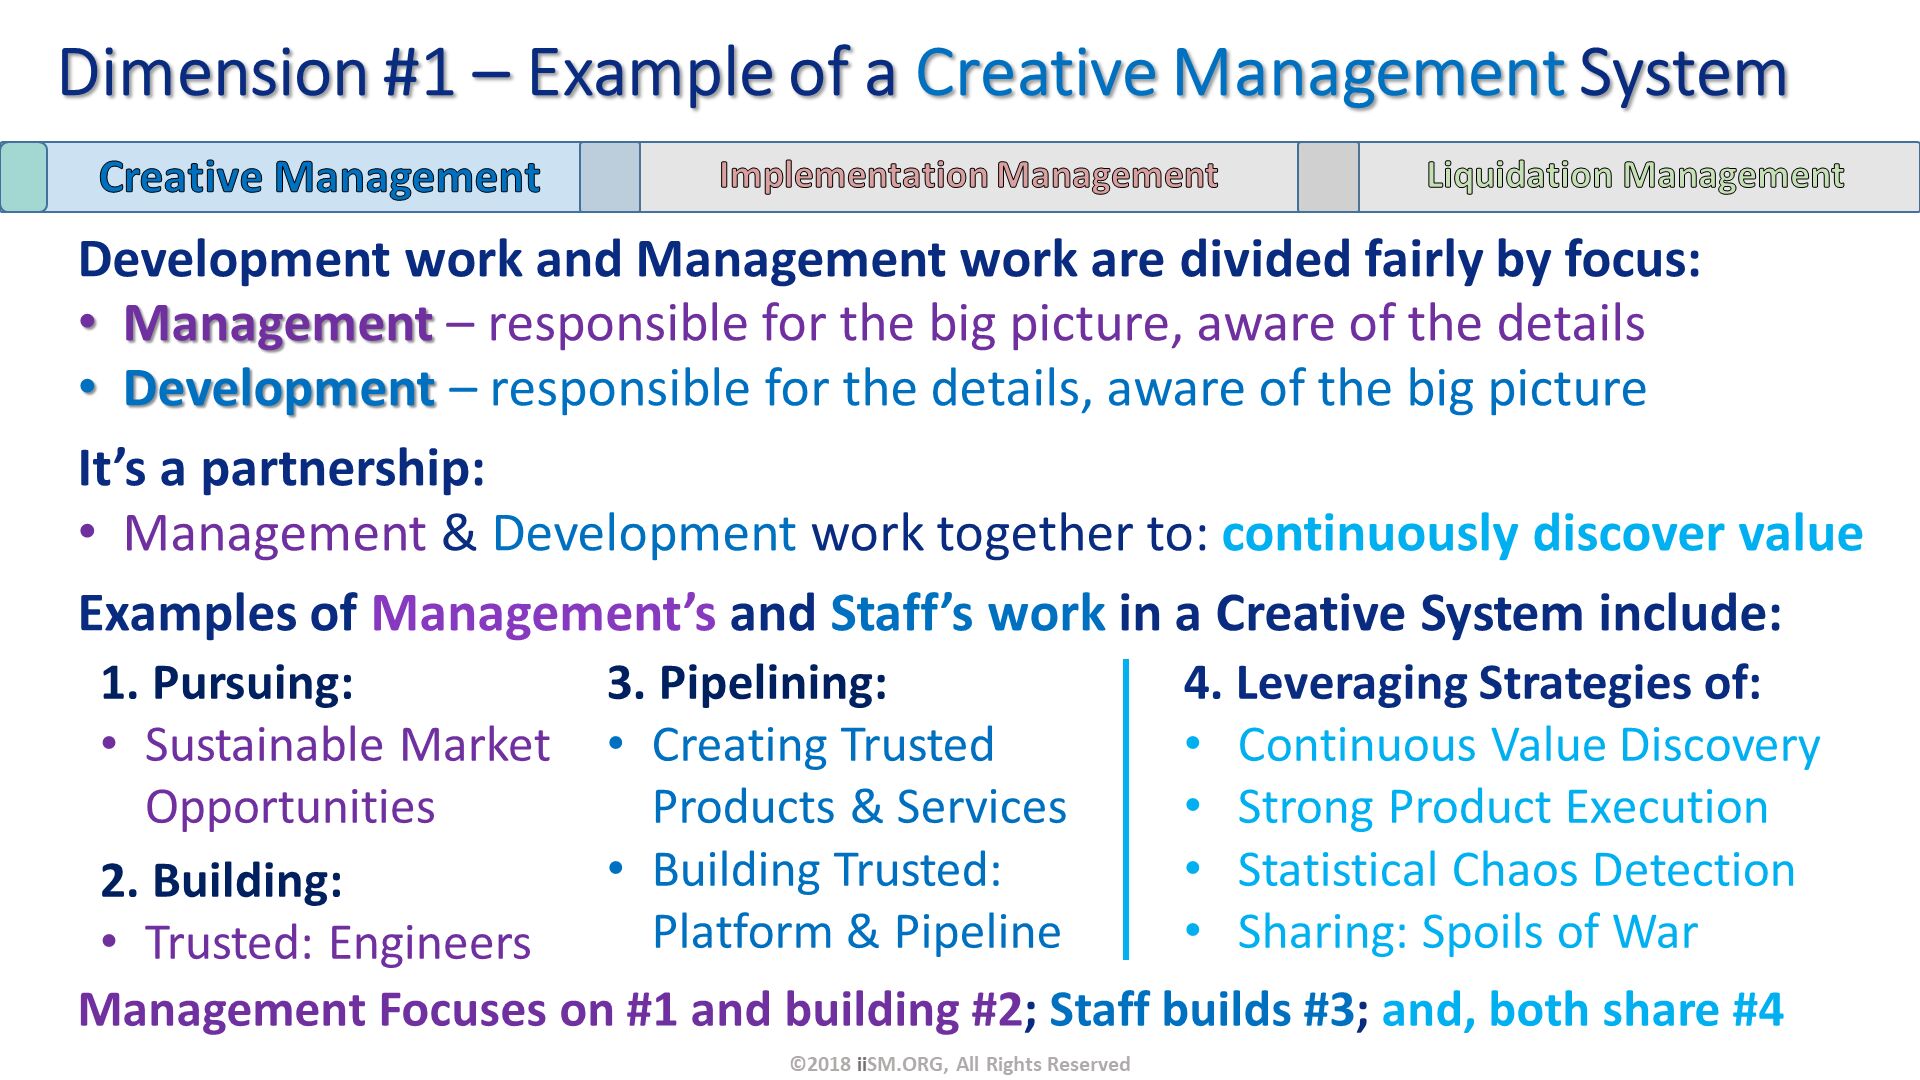 Development work and Management work are divided fairly by focus:
Management – responsible for the big picture, aware of the details
Development – responsible for the details, aware of the big picture
It’s a partnership:
Management & Development work together to: continuously discover value
Examples of Management’s and Staff’s work in a Creative System include:. Dimension #1 – Example of a Creative Management System. 1. Pursuing:
Sustainable Market Opportunities. 4. Leveraging Strategies of:
Continuous Value Discovery
Strong Product Execution
Statistical Chaos Detection
Sharing: Spoils of War. 2. Building:
Trusted: Engineers . 3. Pipelining:
Creating Trusted Products & Services
Building Trusted: Platform & Pipeline. Management Focuses on #1 and building #2; Staff builds #3; and, both share #4. ©2018 iiSM.ORG, All Rights Reserved. 